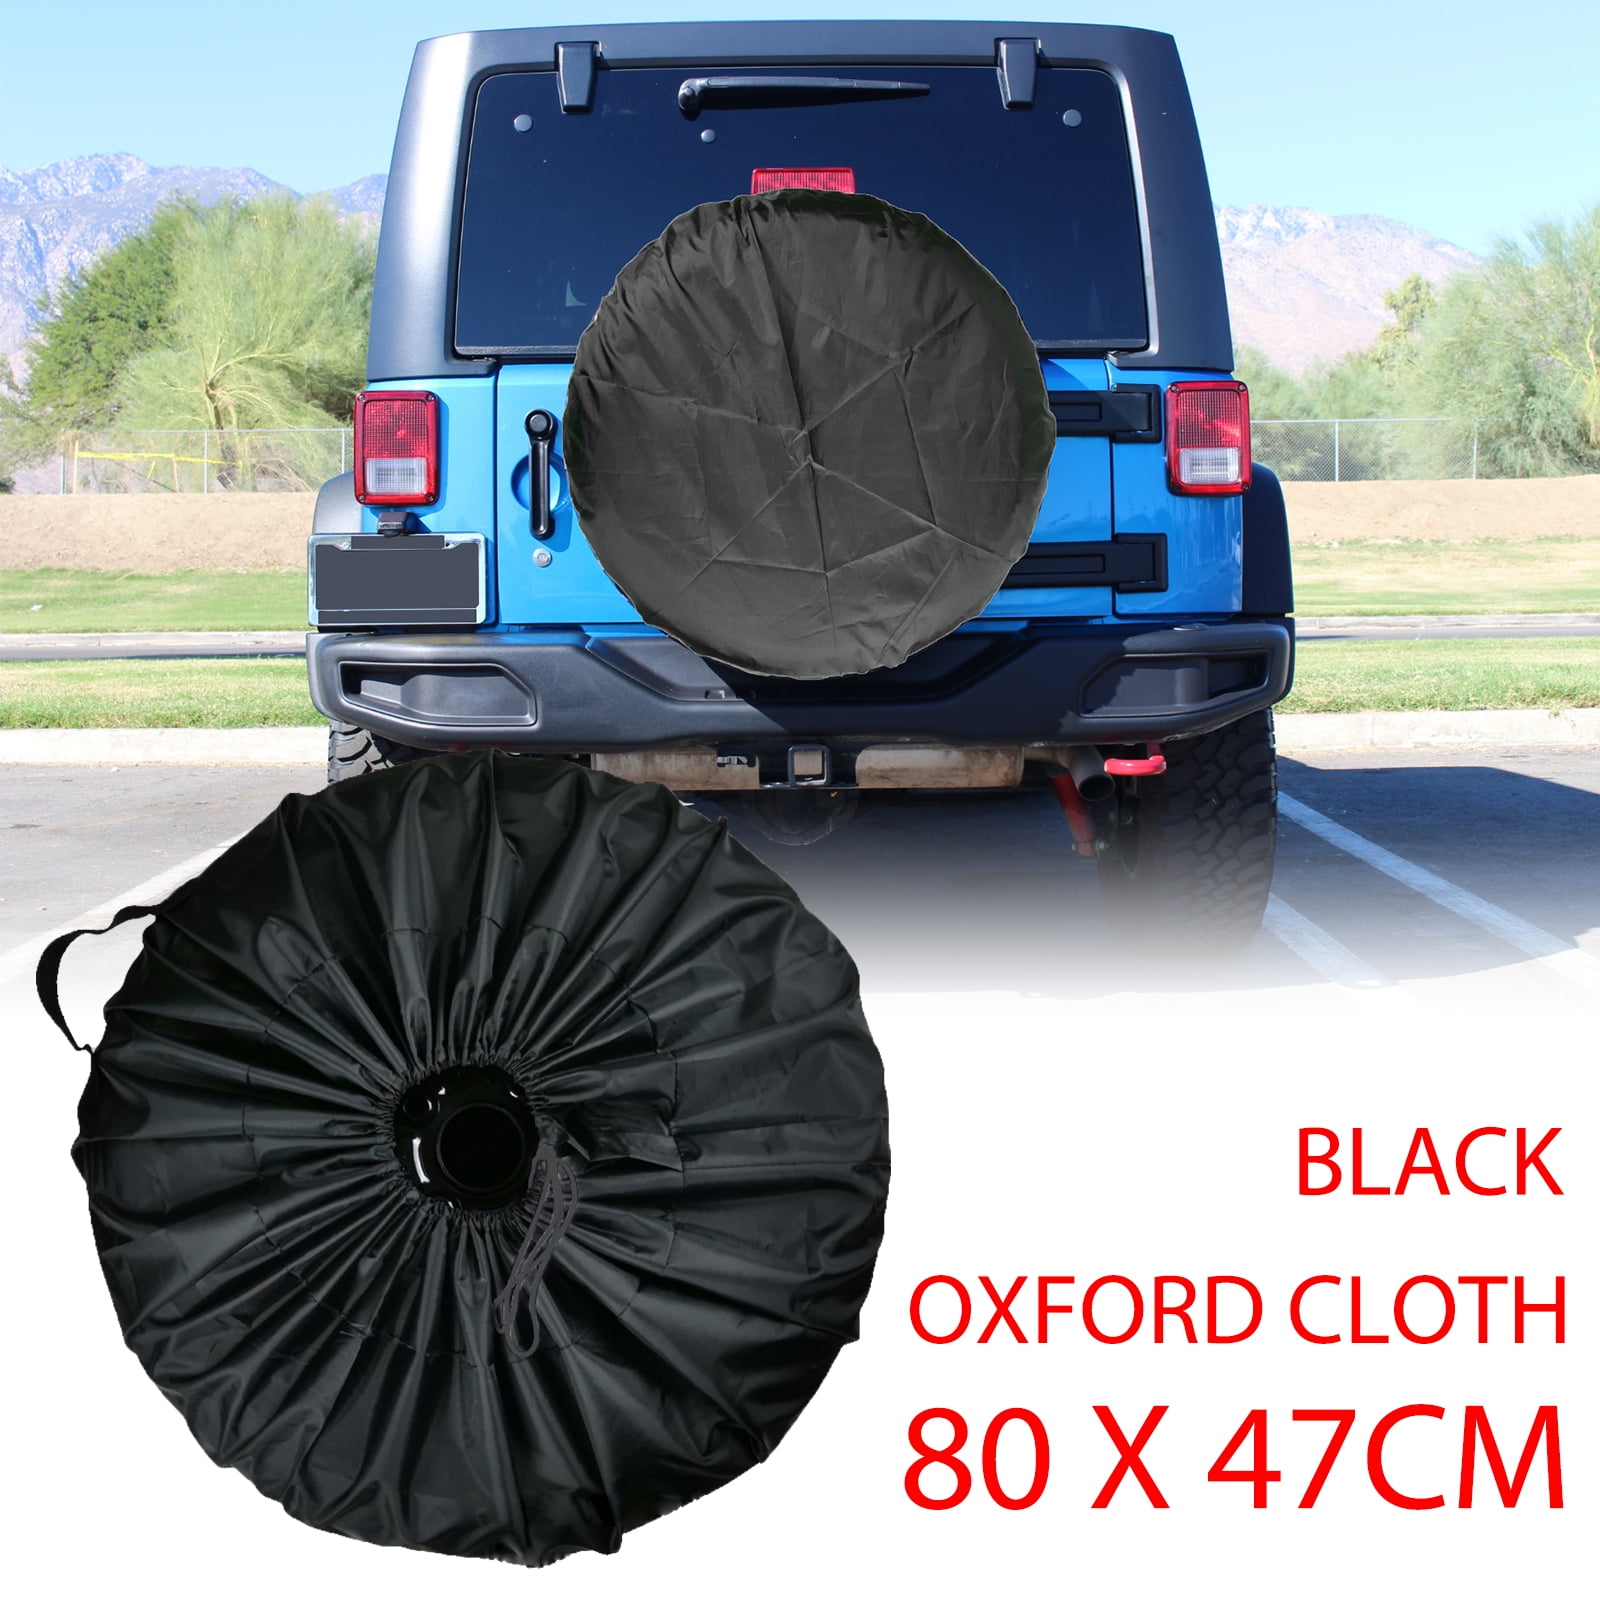 Petio Tire Covers Universal Spare Wheel Tire Cover Waterproof for Rv SUV Truck Trailer Camper 